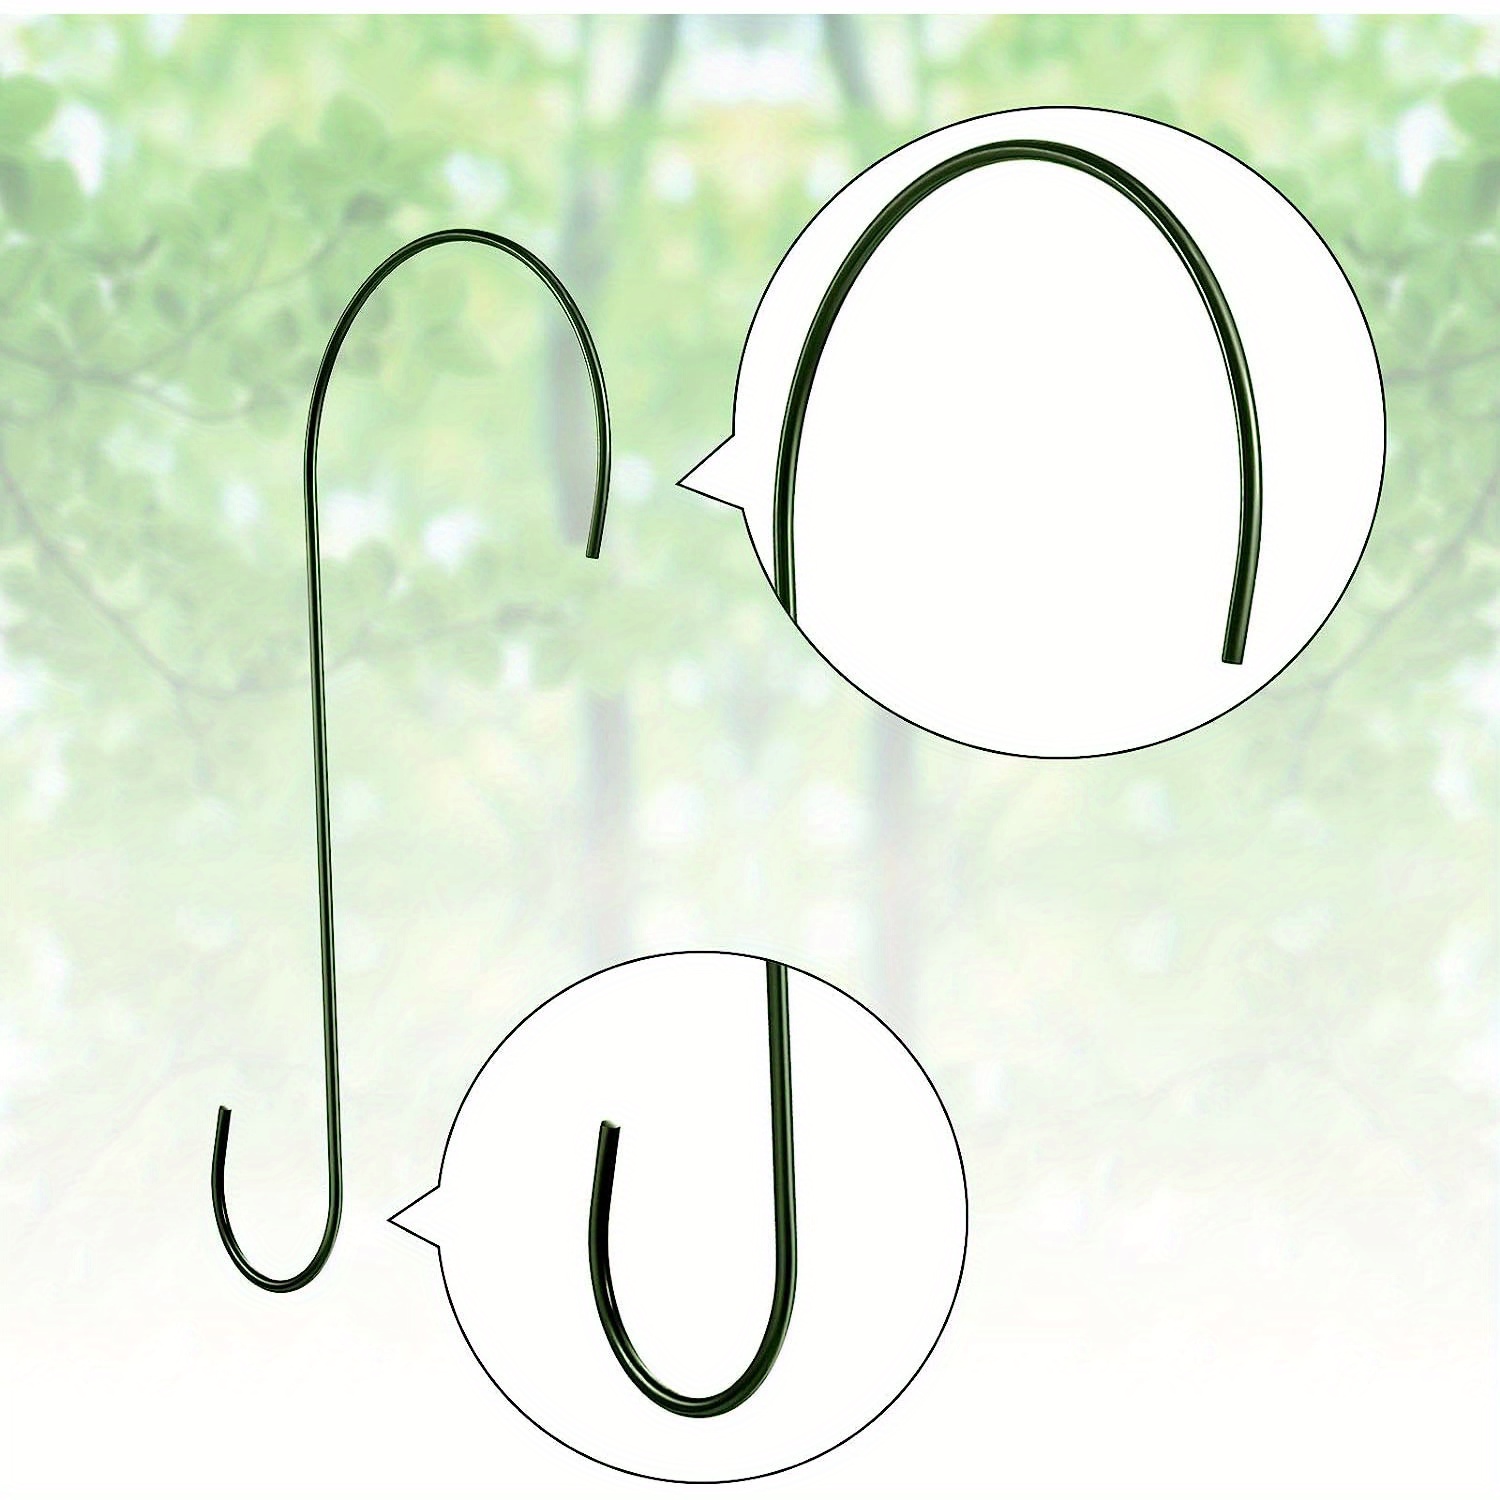 2pcs, 12 Inches Tree Branch Hooks,S Shape Hooks - Metal Hanger Hook For  Hanging Bird Feeders, Baskets,Plants, Lanterns And Ornaments (Green)